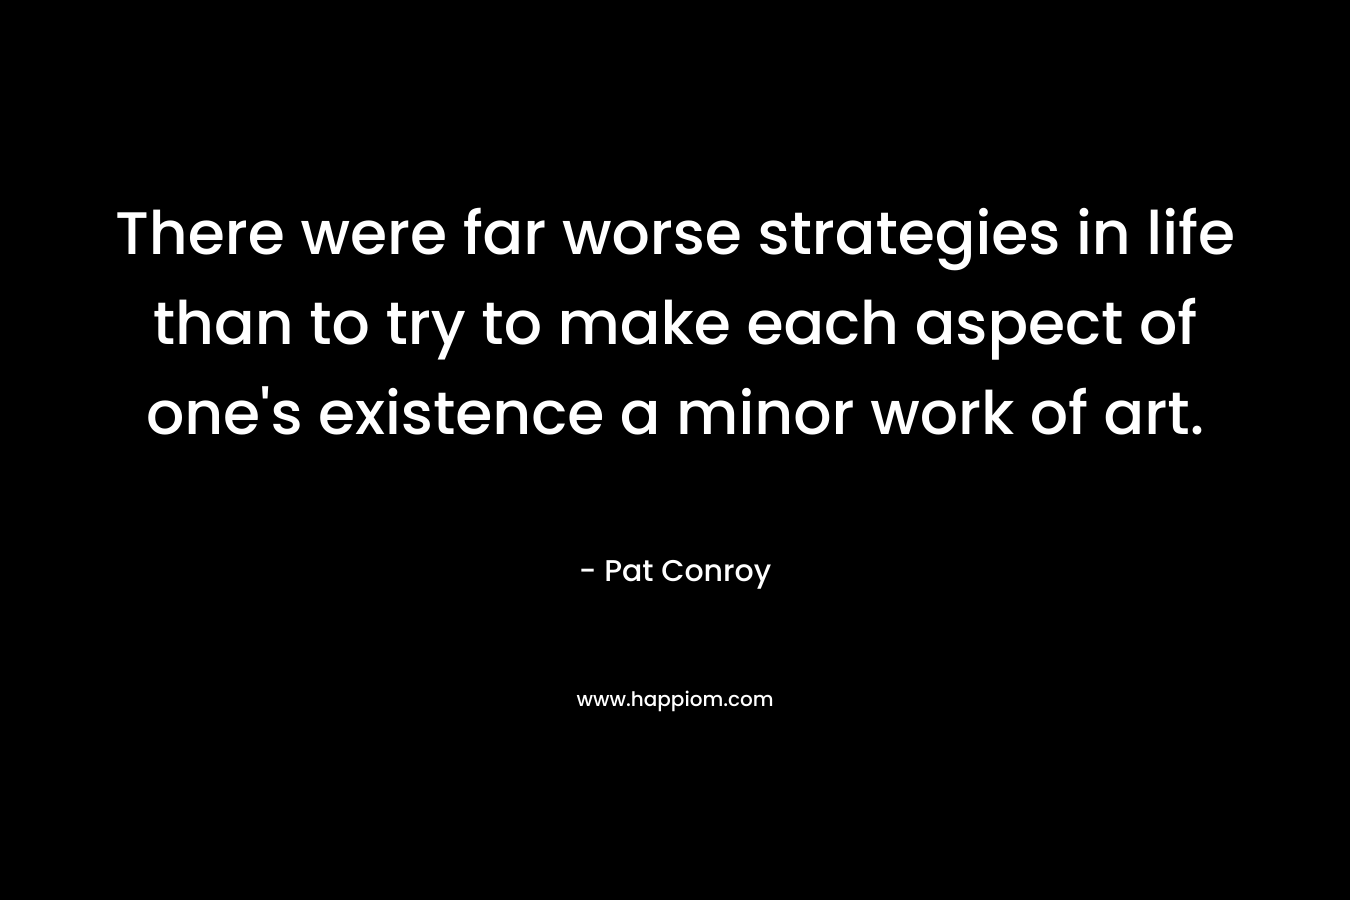 There were far worse strategies in life than to try to make each aspect of one's existence a minor work of art.